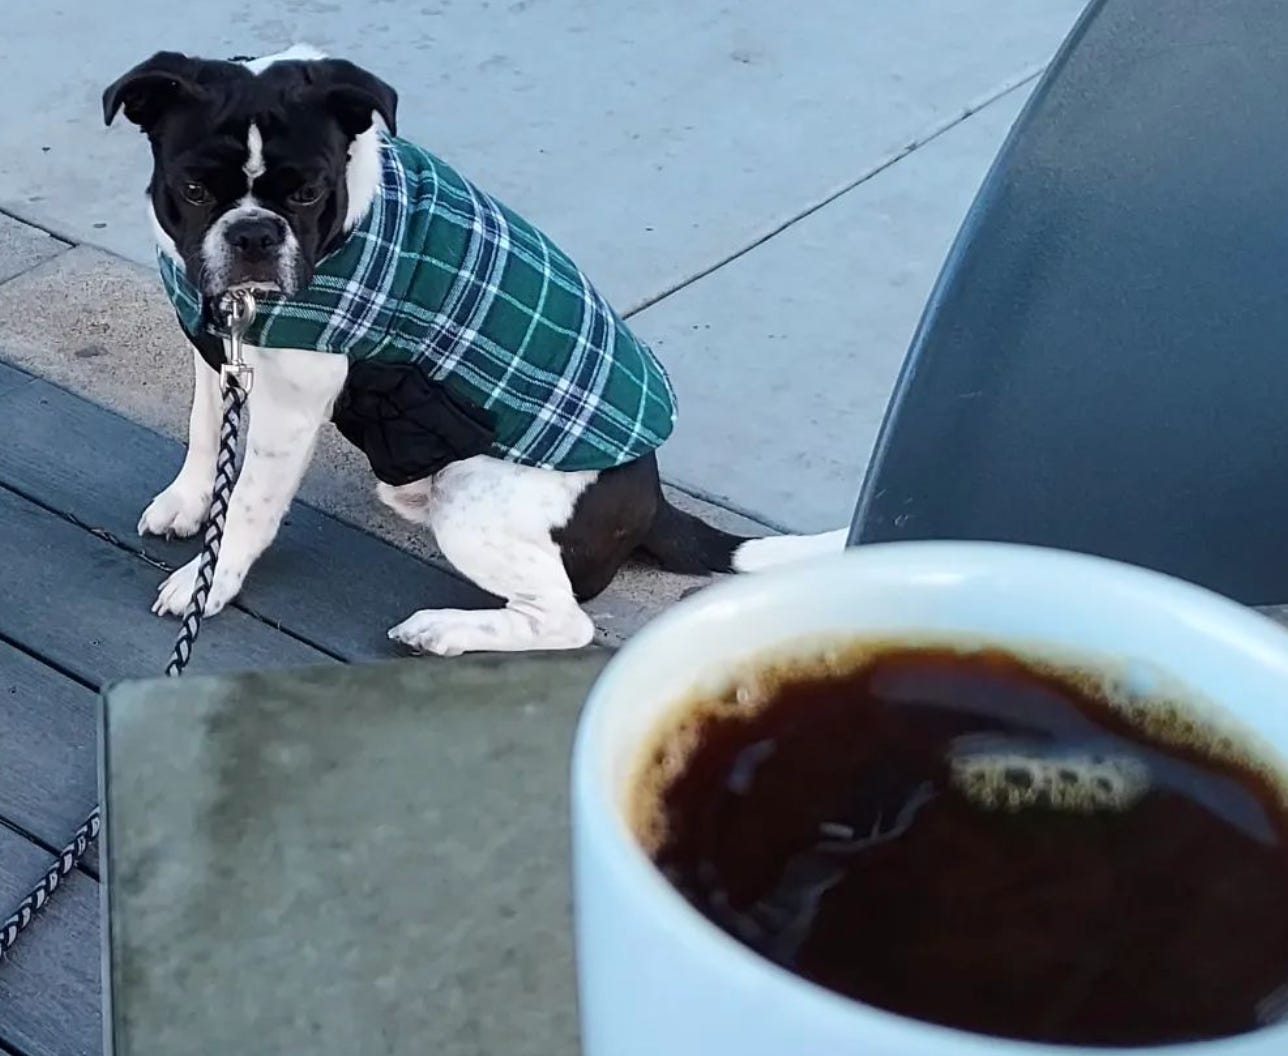 A small black and white puppy with floppy black ears wearing a green and black flannel jacket looks up at the camera and a blurred cup of coffee in the foreground.